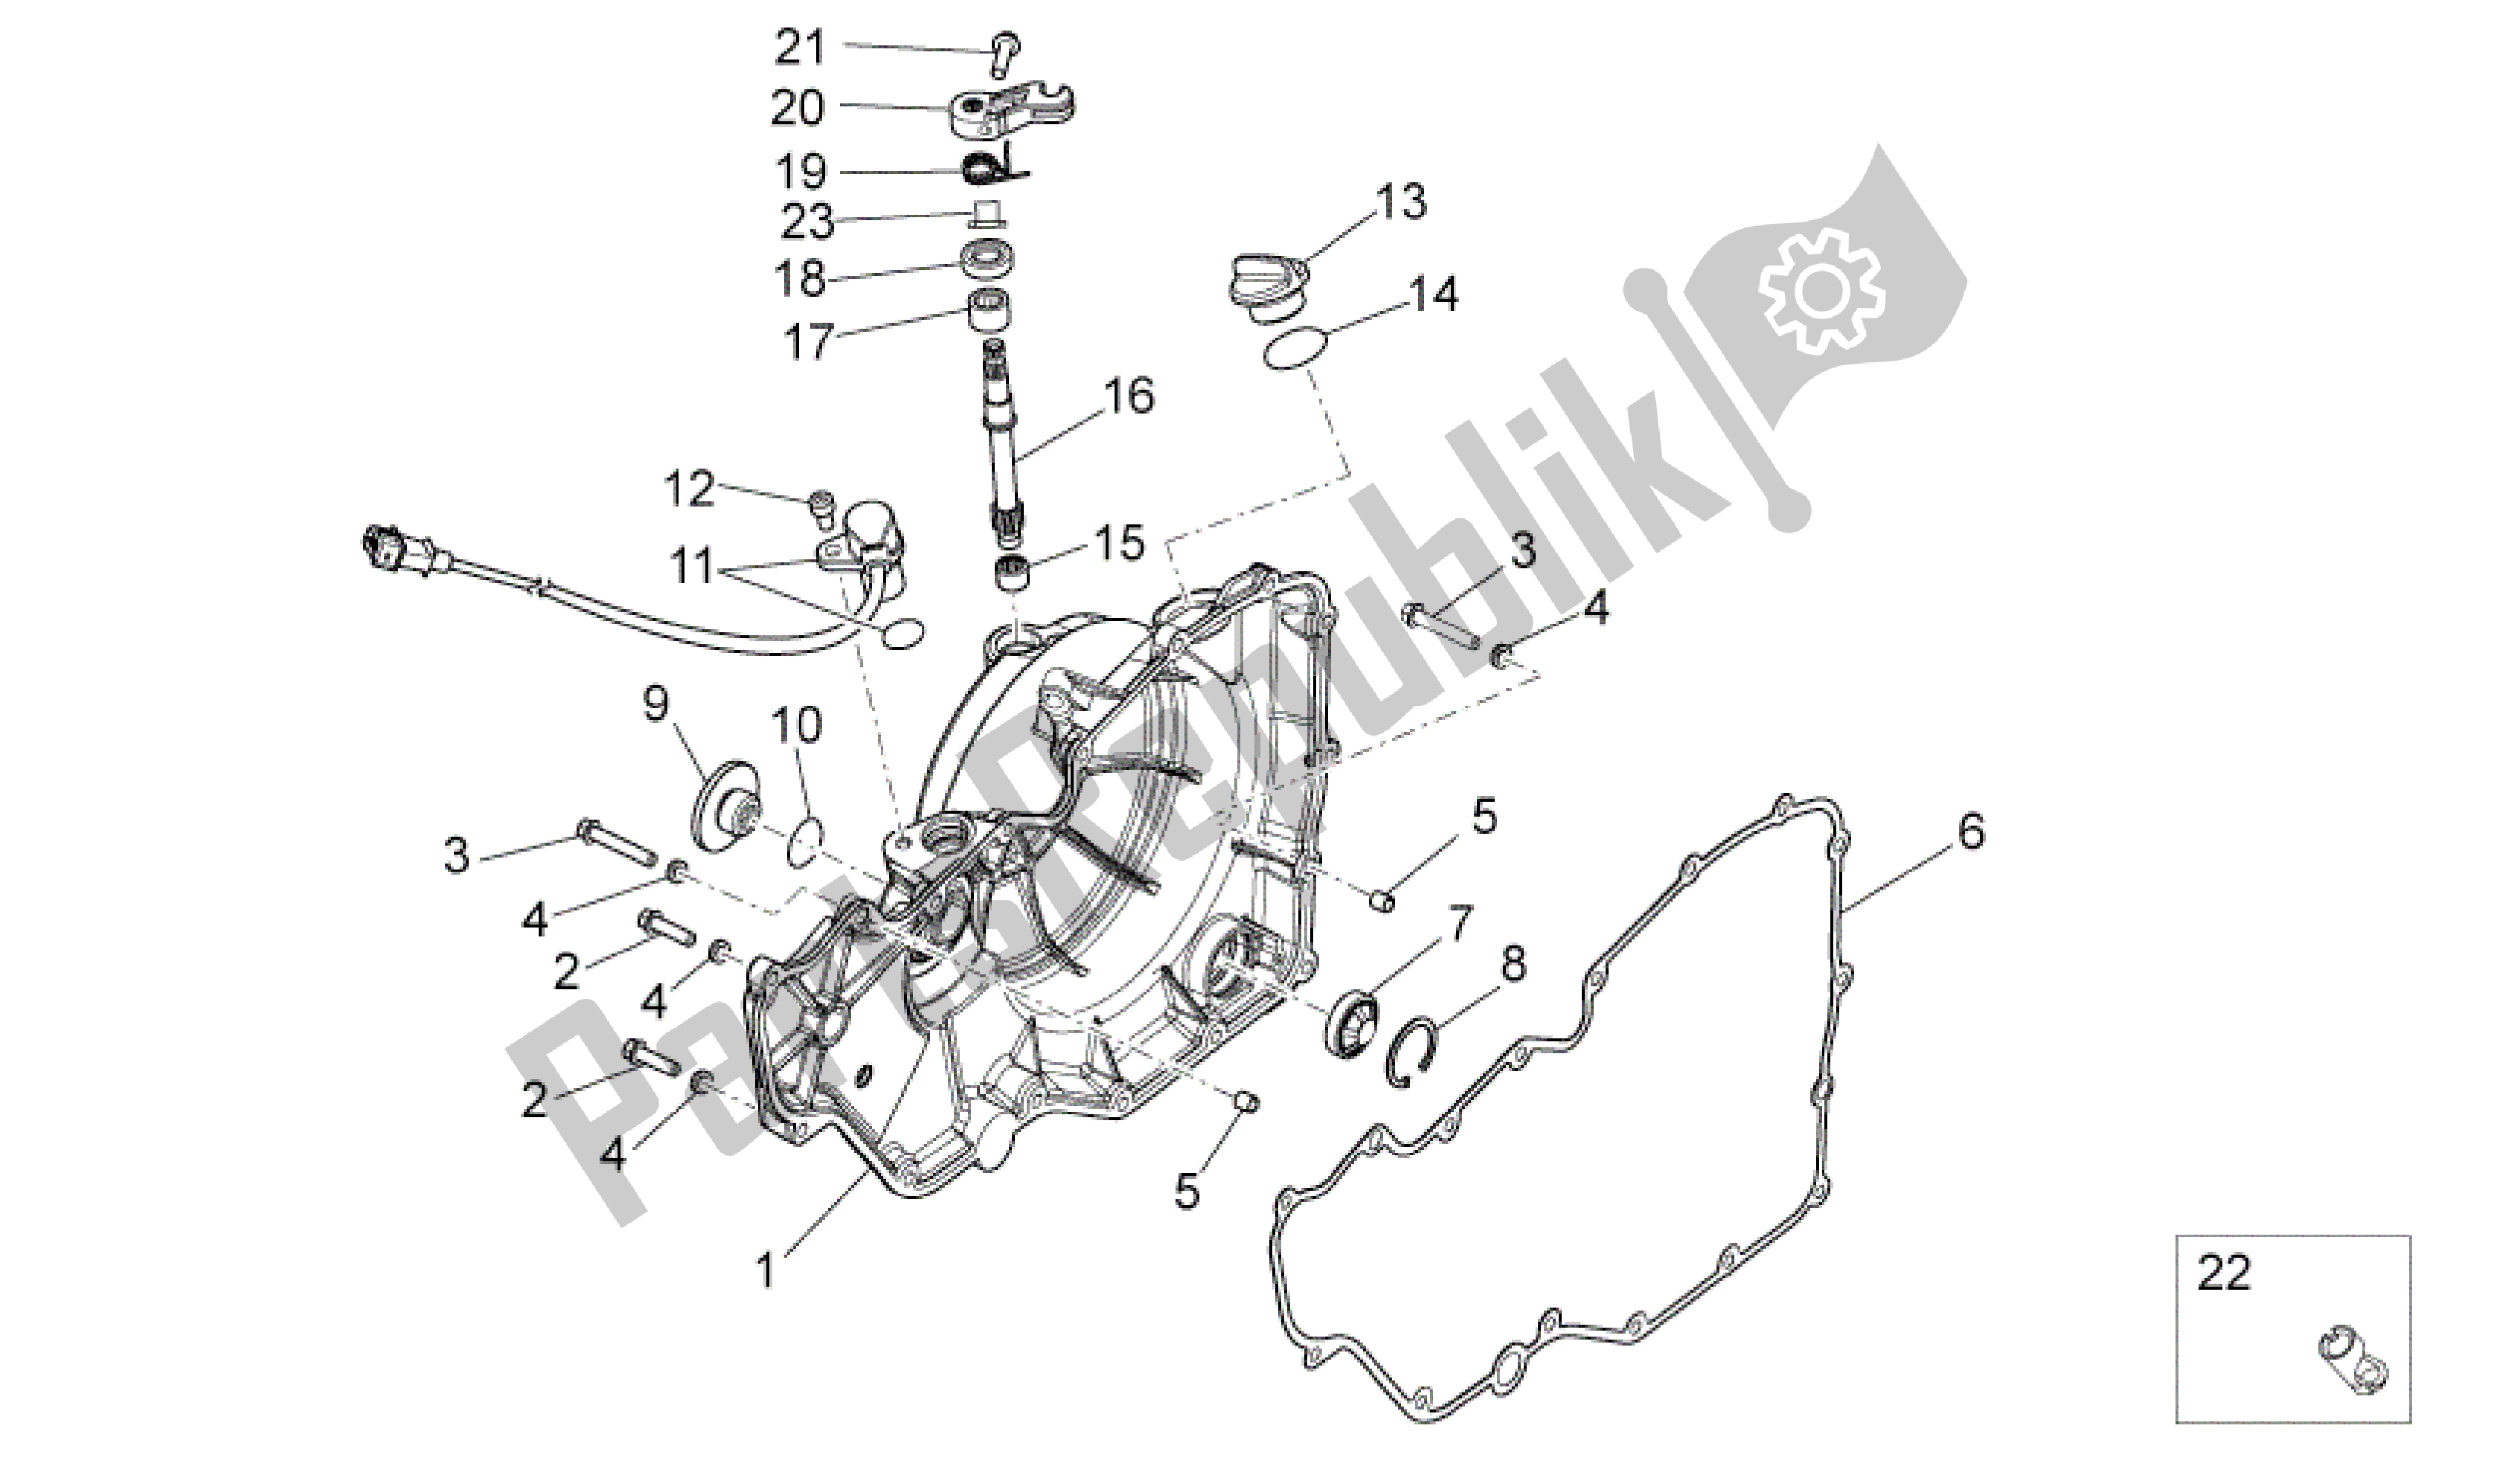 All parts for the Clutch Cover of the Aprilia RSV4 Aprc Factory 3981 1000 2011 - 2012